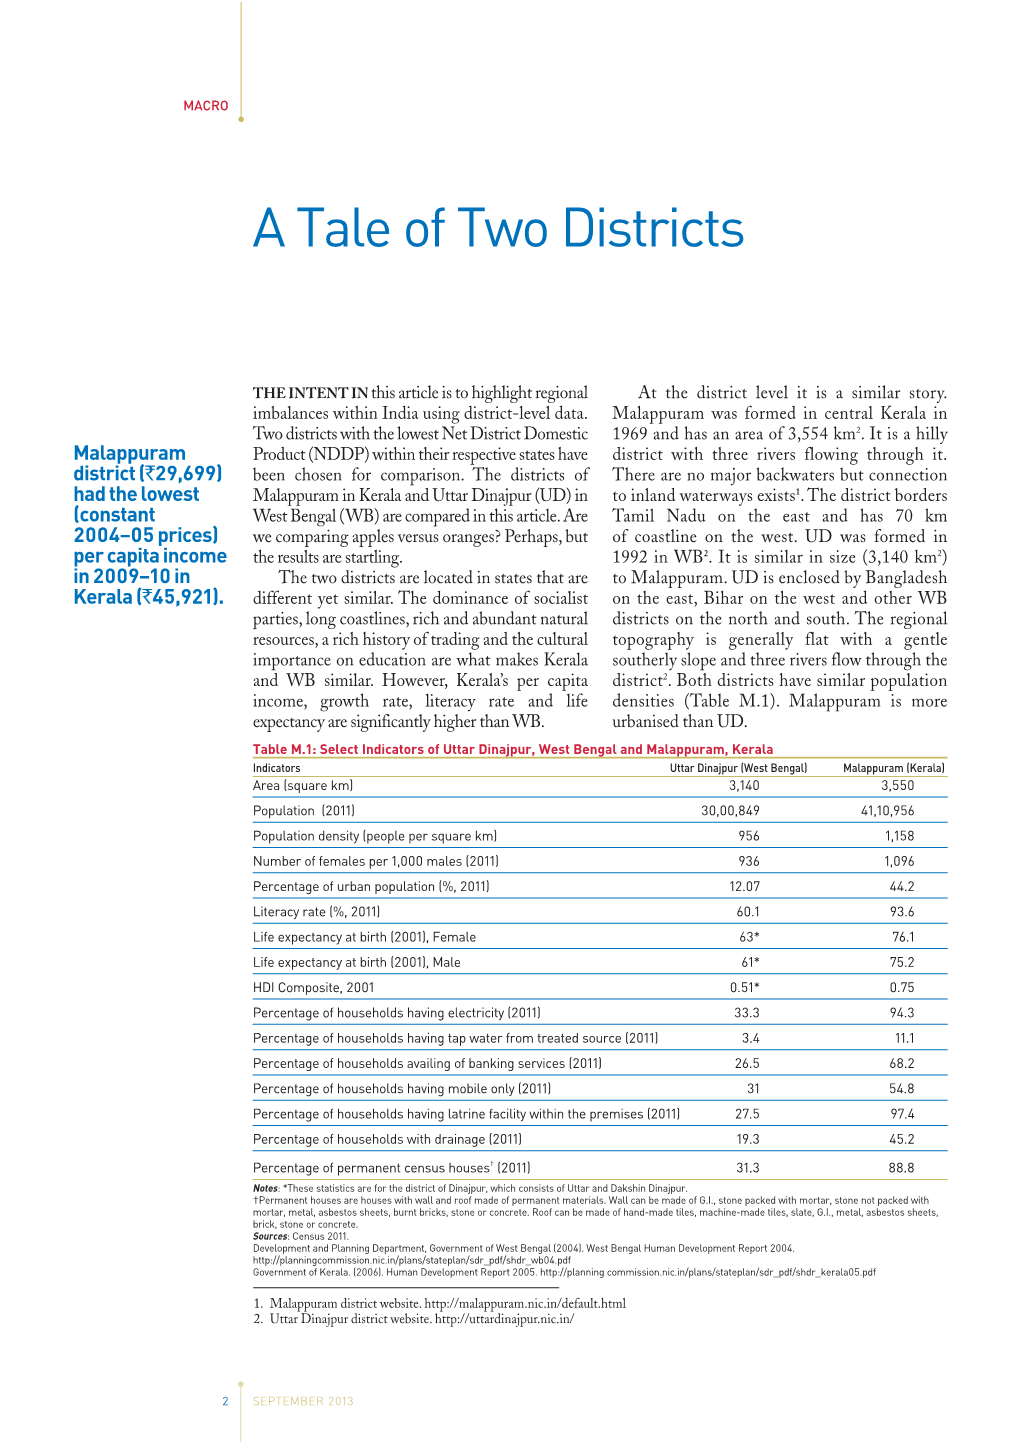 Macro: a Tale of Two Districts